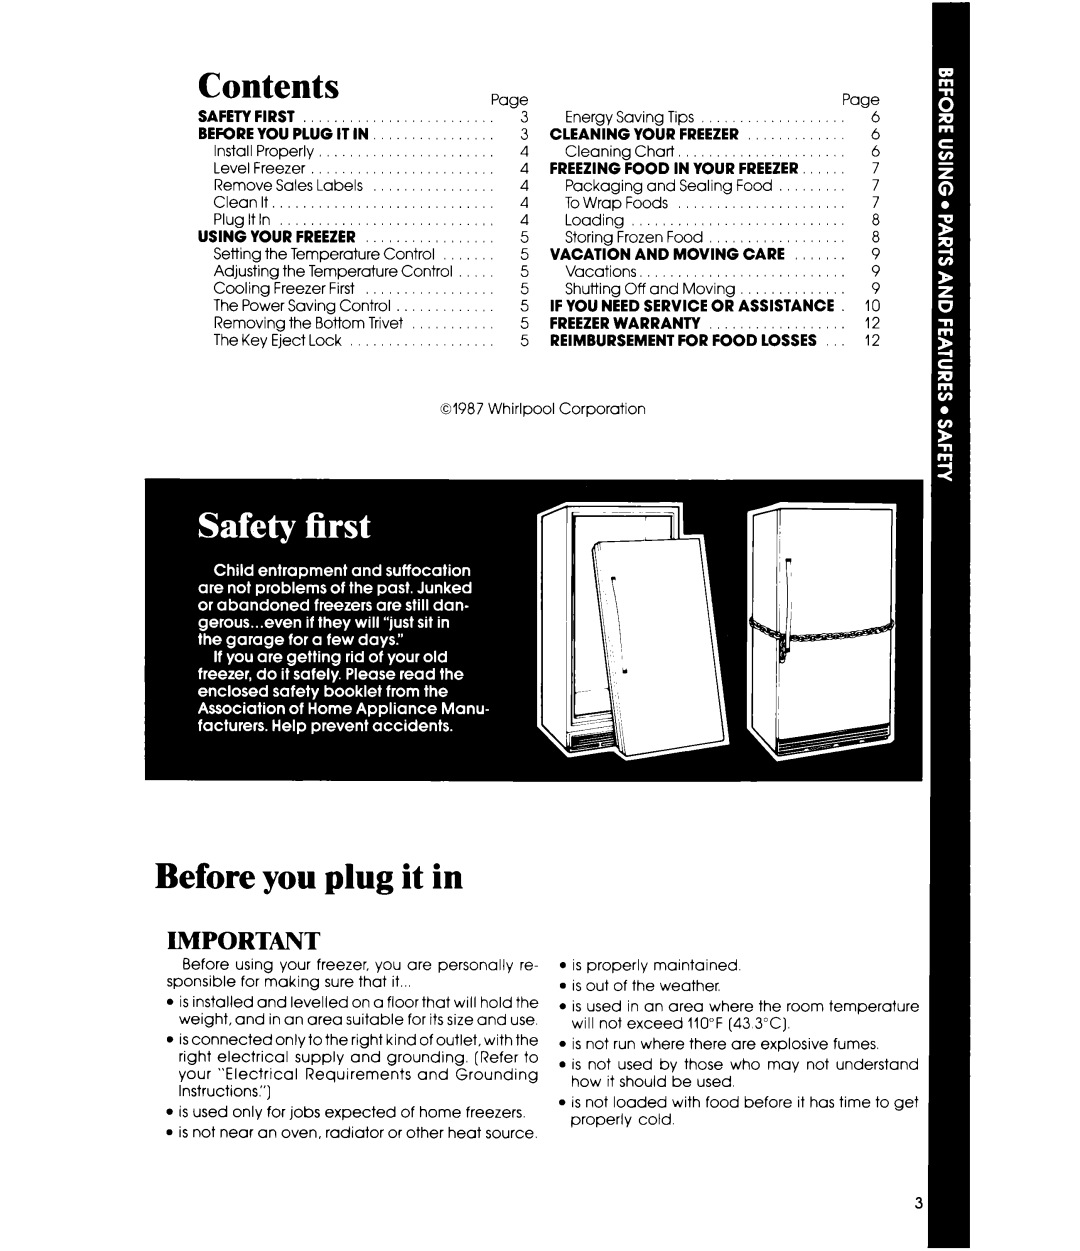 Whirlpool EV150C manual Contents, Before you plug it in 